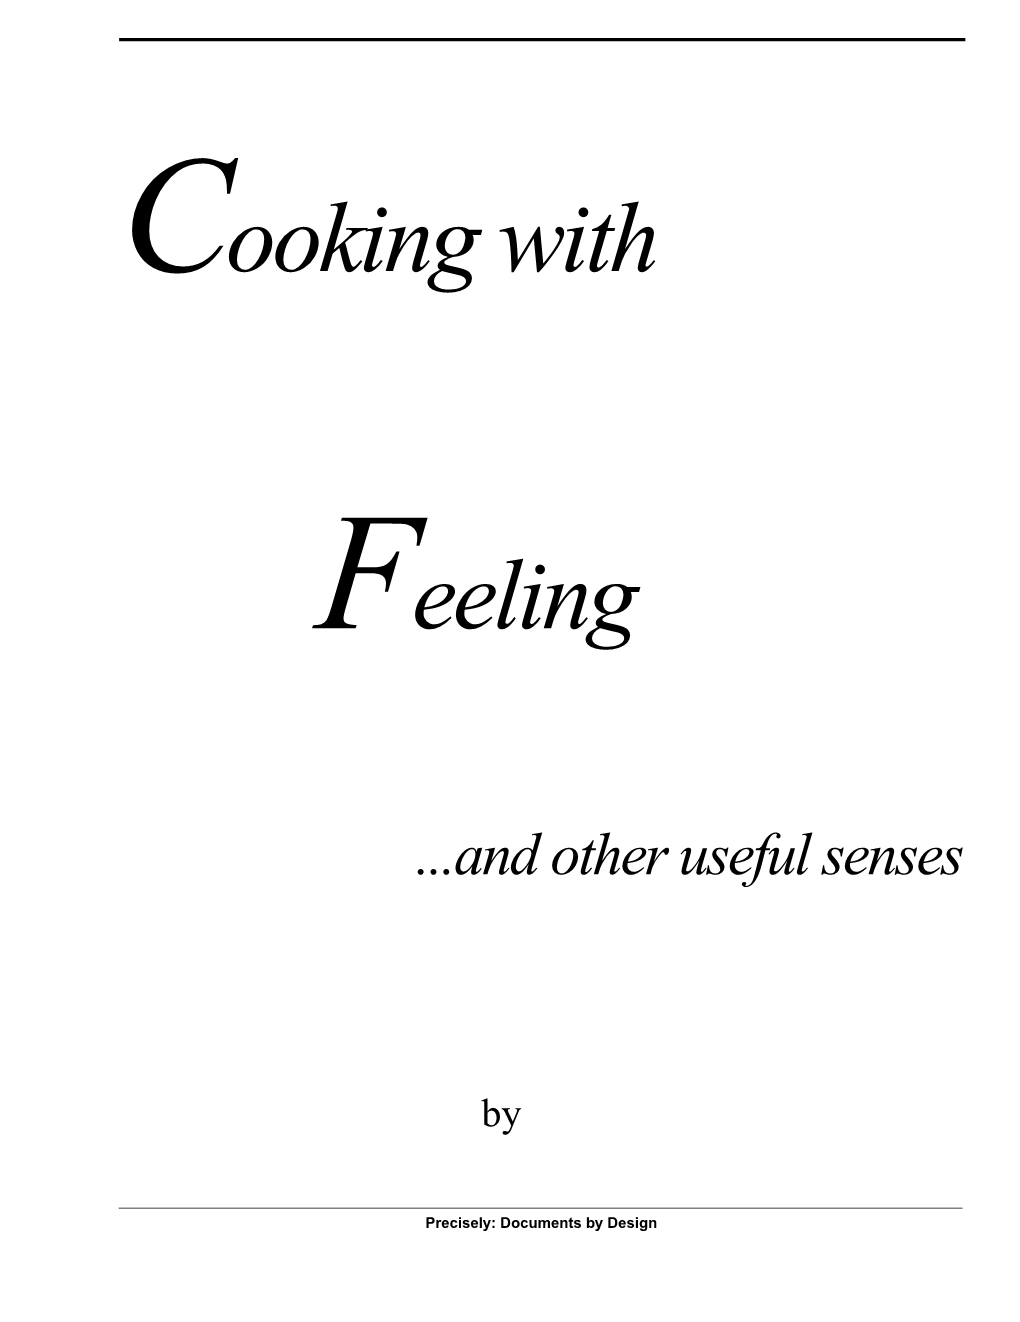 Cooking with Feeling